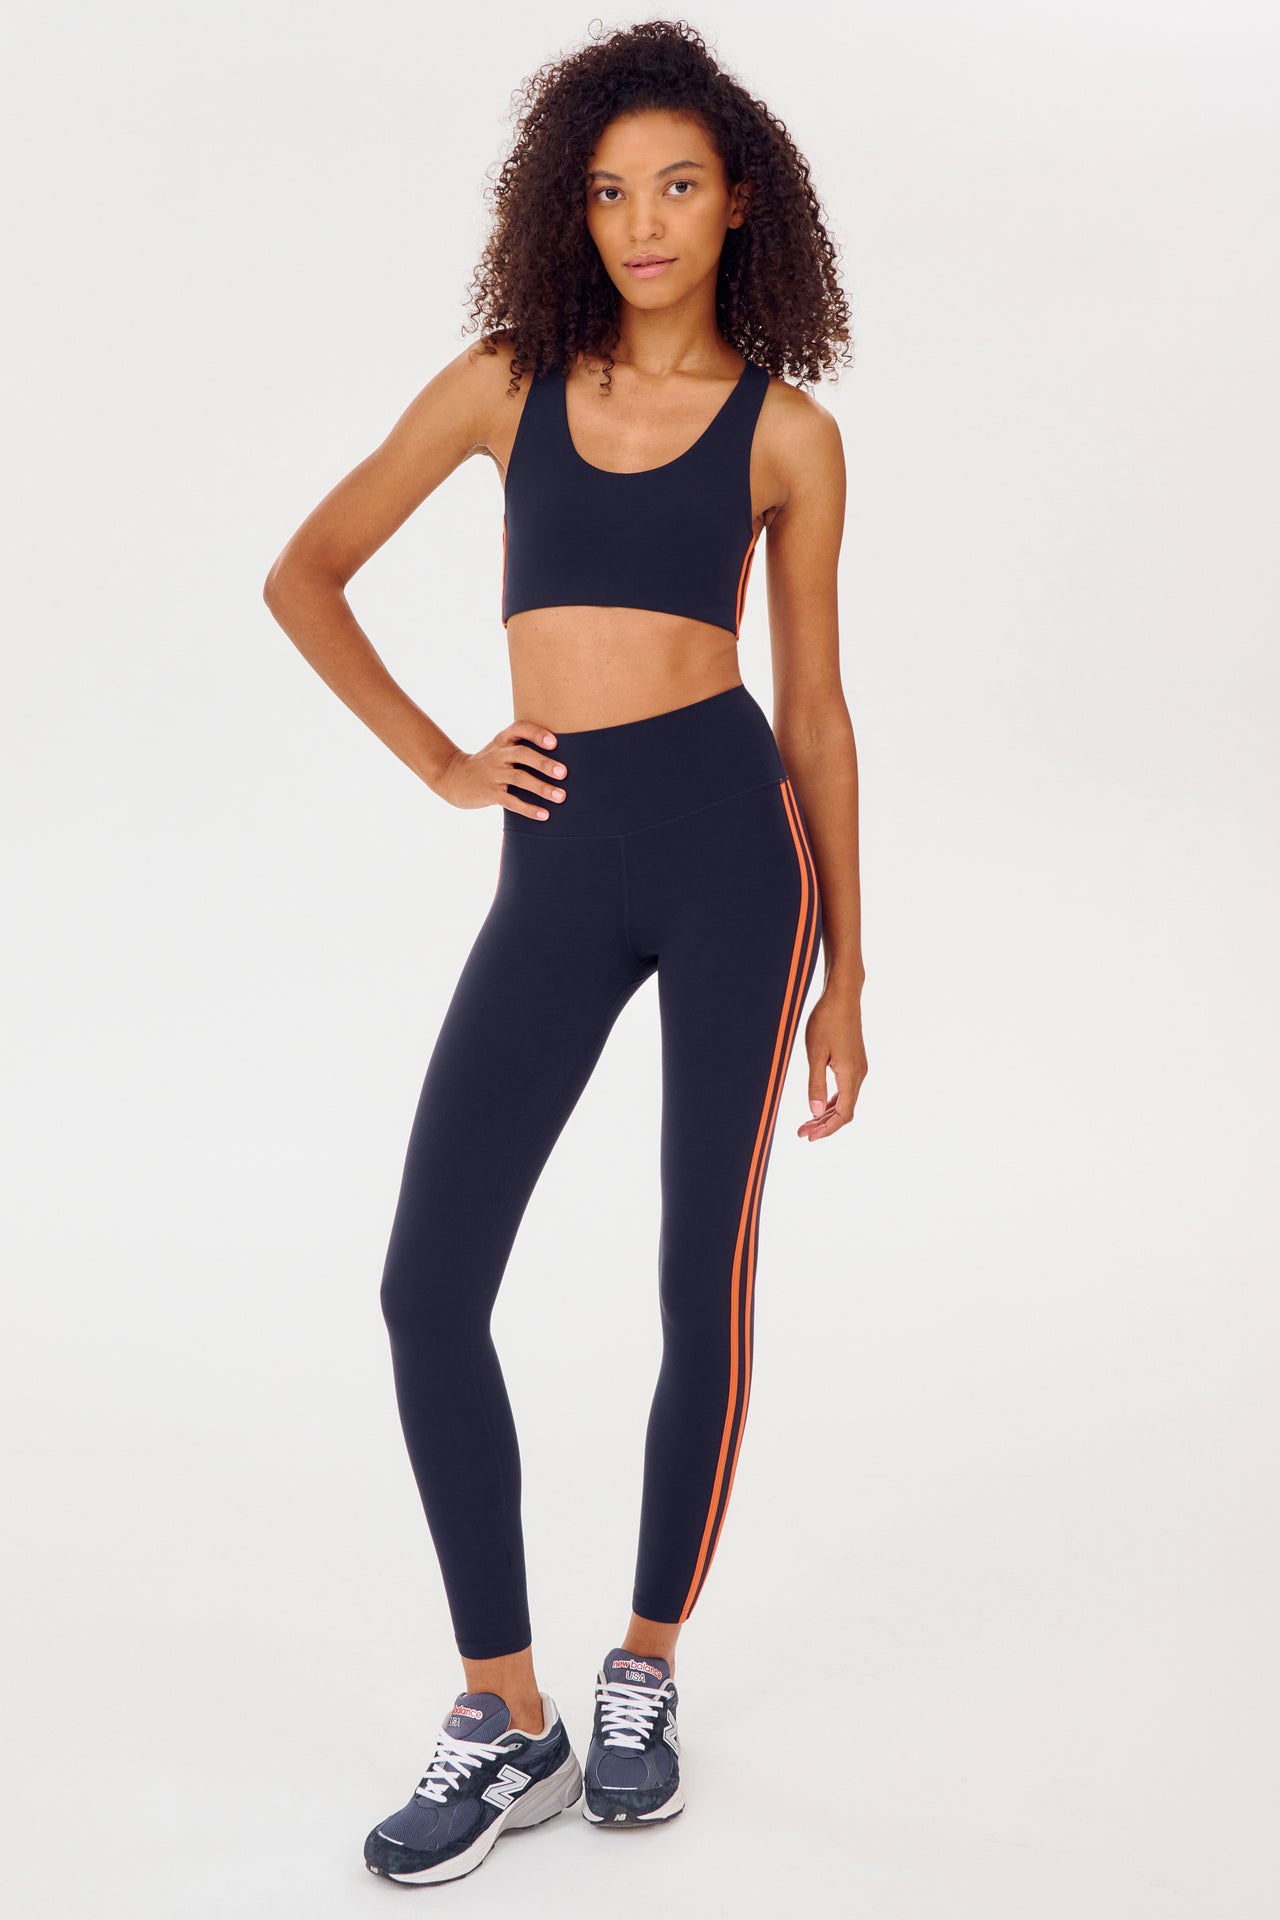 Full front view of girl wearing dark blue leggings with two thin red stripes down the side and a dark blue sports bra with dark blue shoes